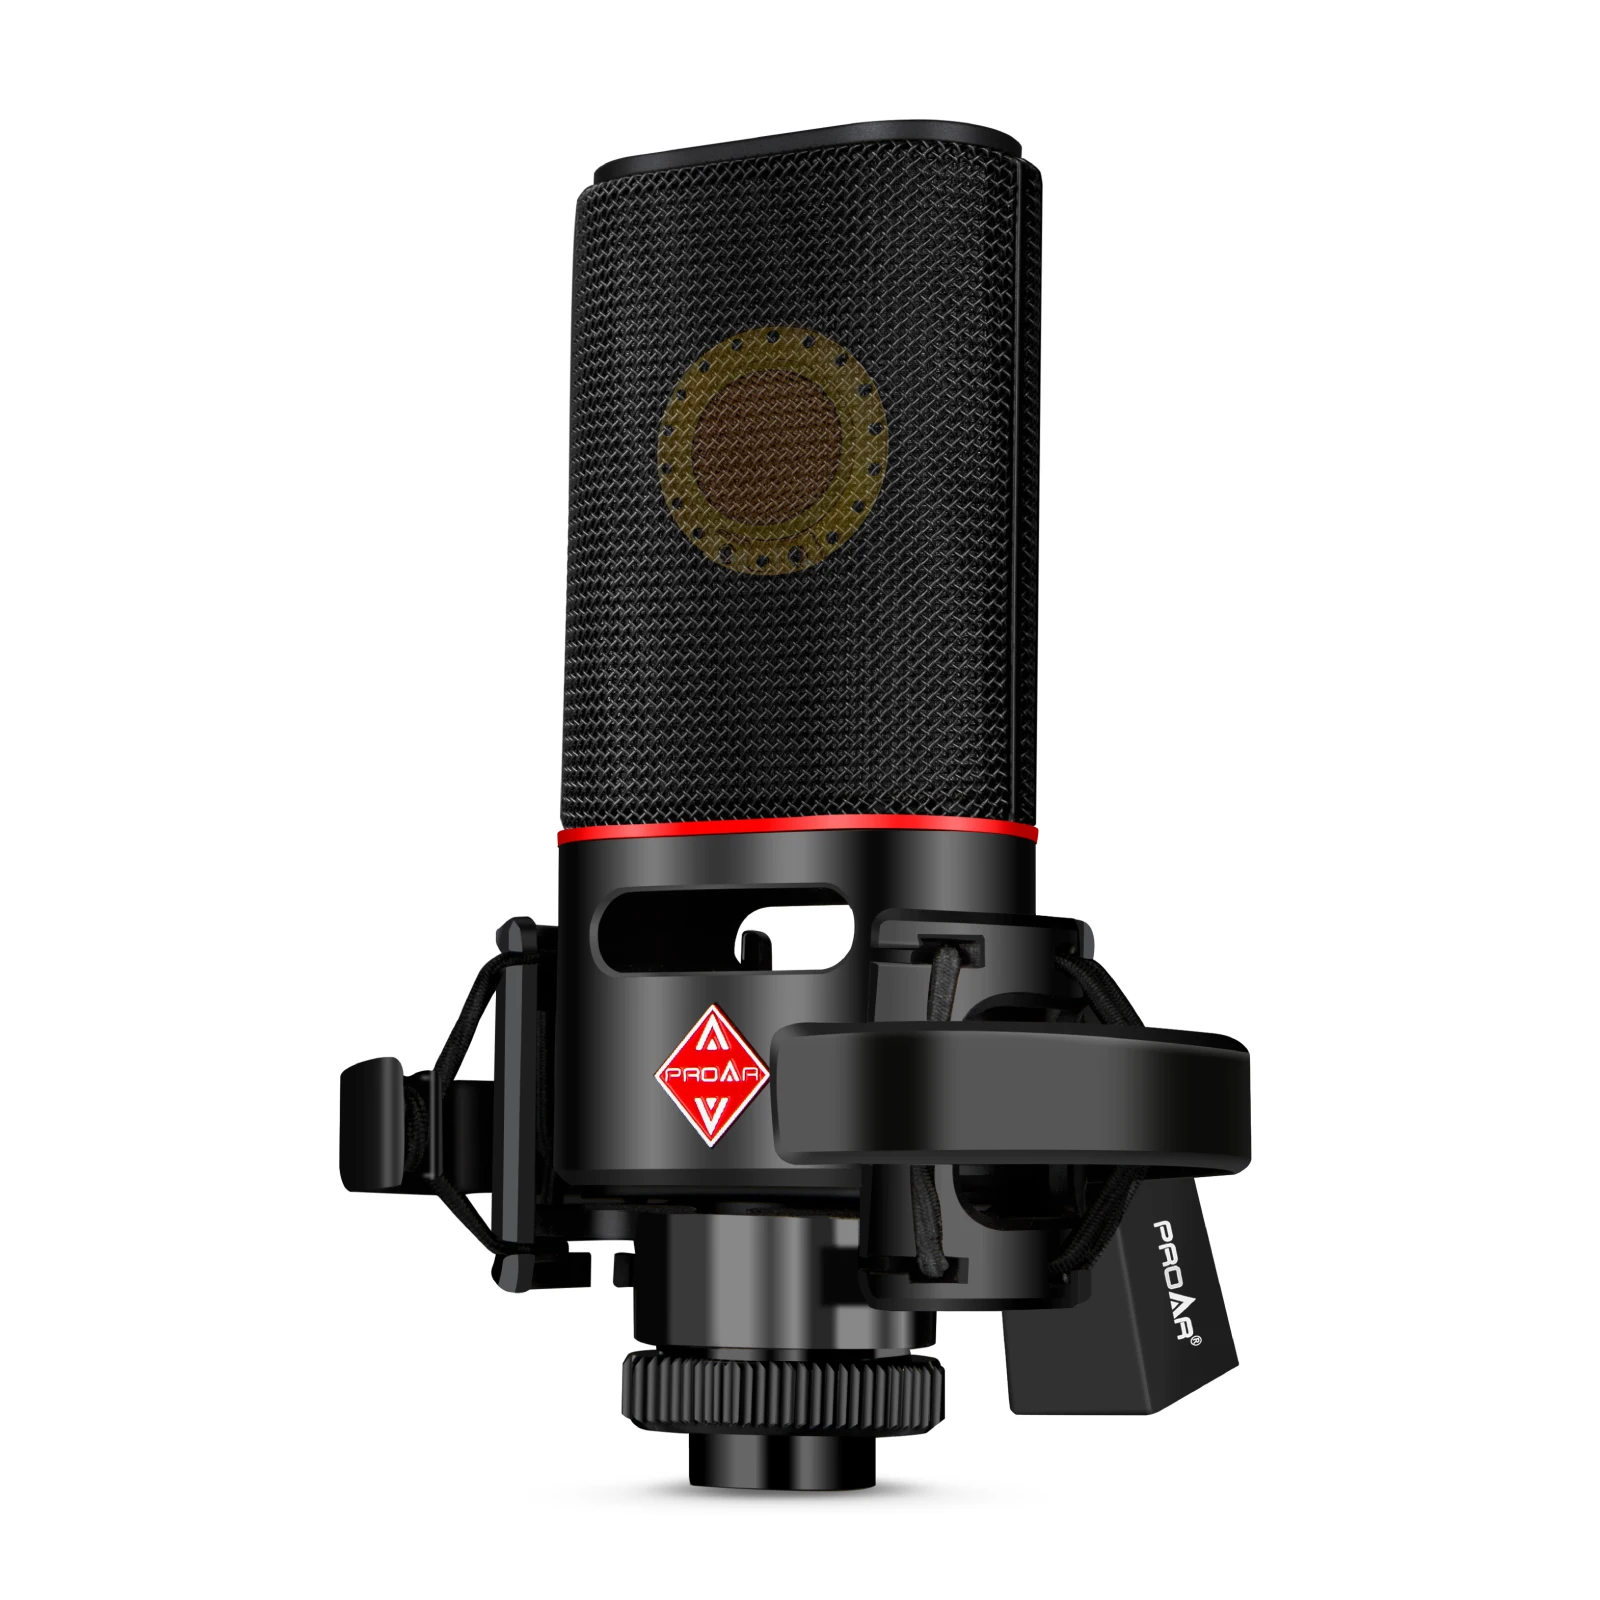 

Professional XLR Condenser Microphone With 25mm Large Diaphragm Cardioid Mic for PC Recording Podcasting Streaming Gaming ASMR